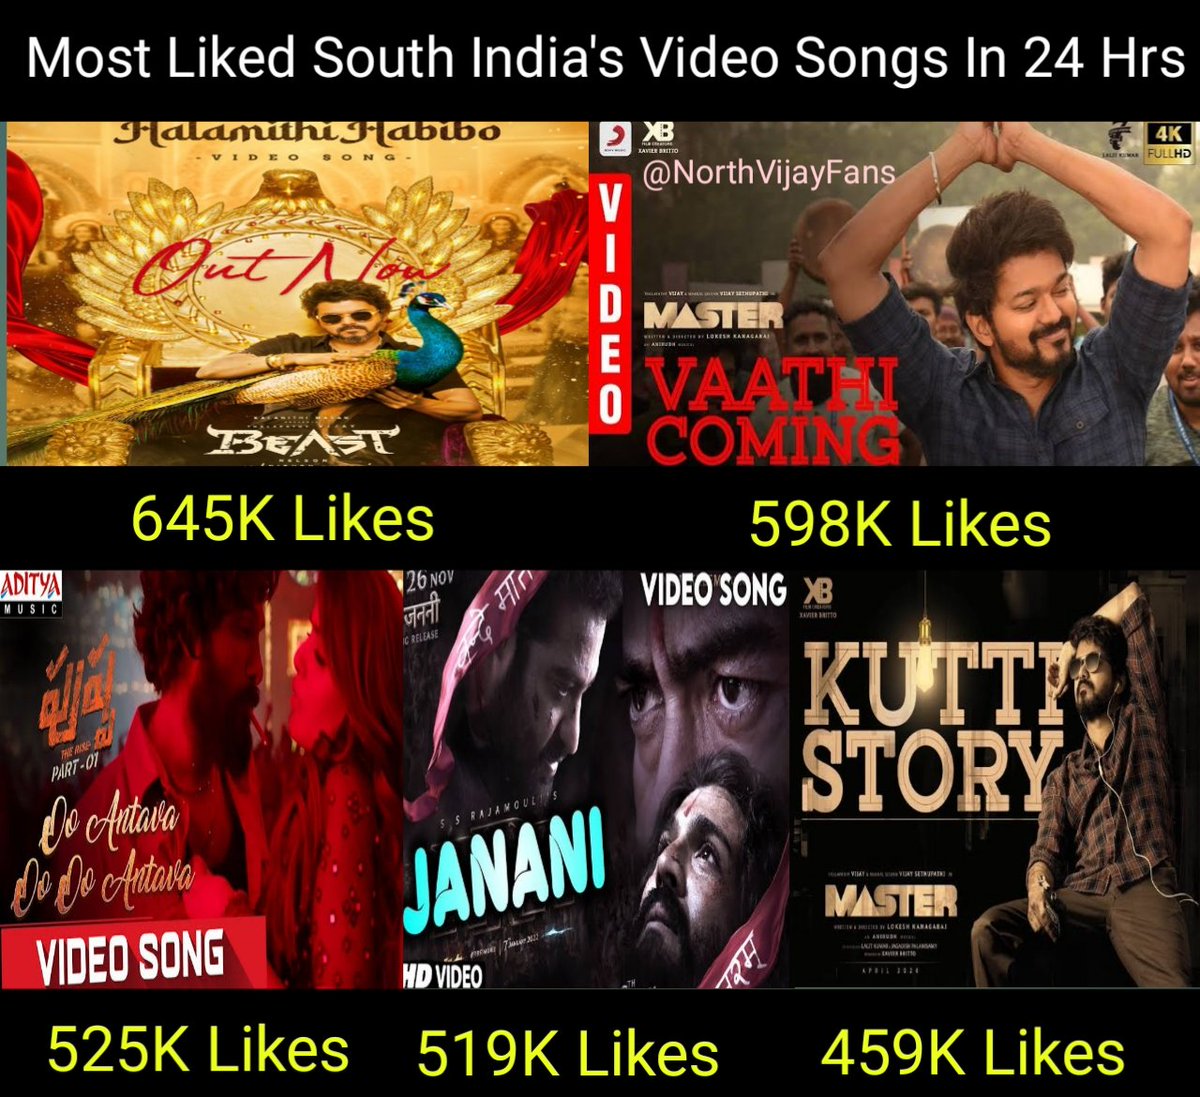 Most Liked South India's Video Song in 24hrs

1. #ArabicKuthu - 645K
2. #VaathiComing - 598K
3. Oo Antava - 525K 
4. Janani - 519K 
5. #KuttiStory - 459K 

#Beast #Thalapathy66